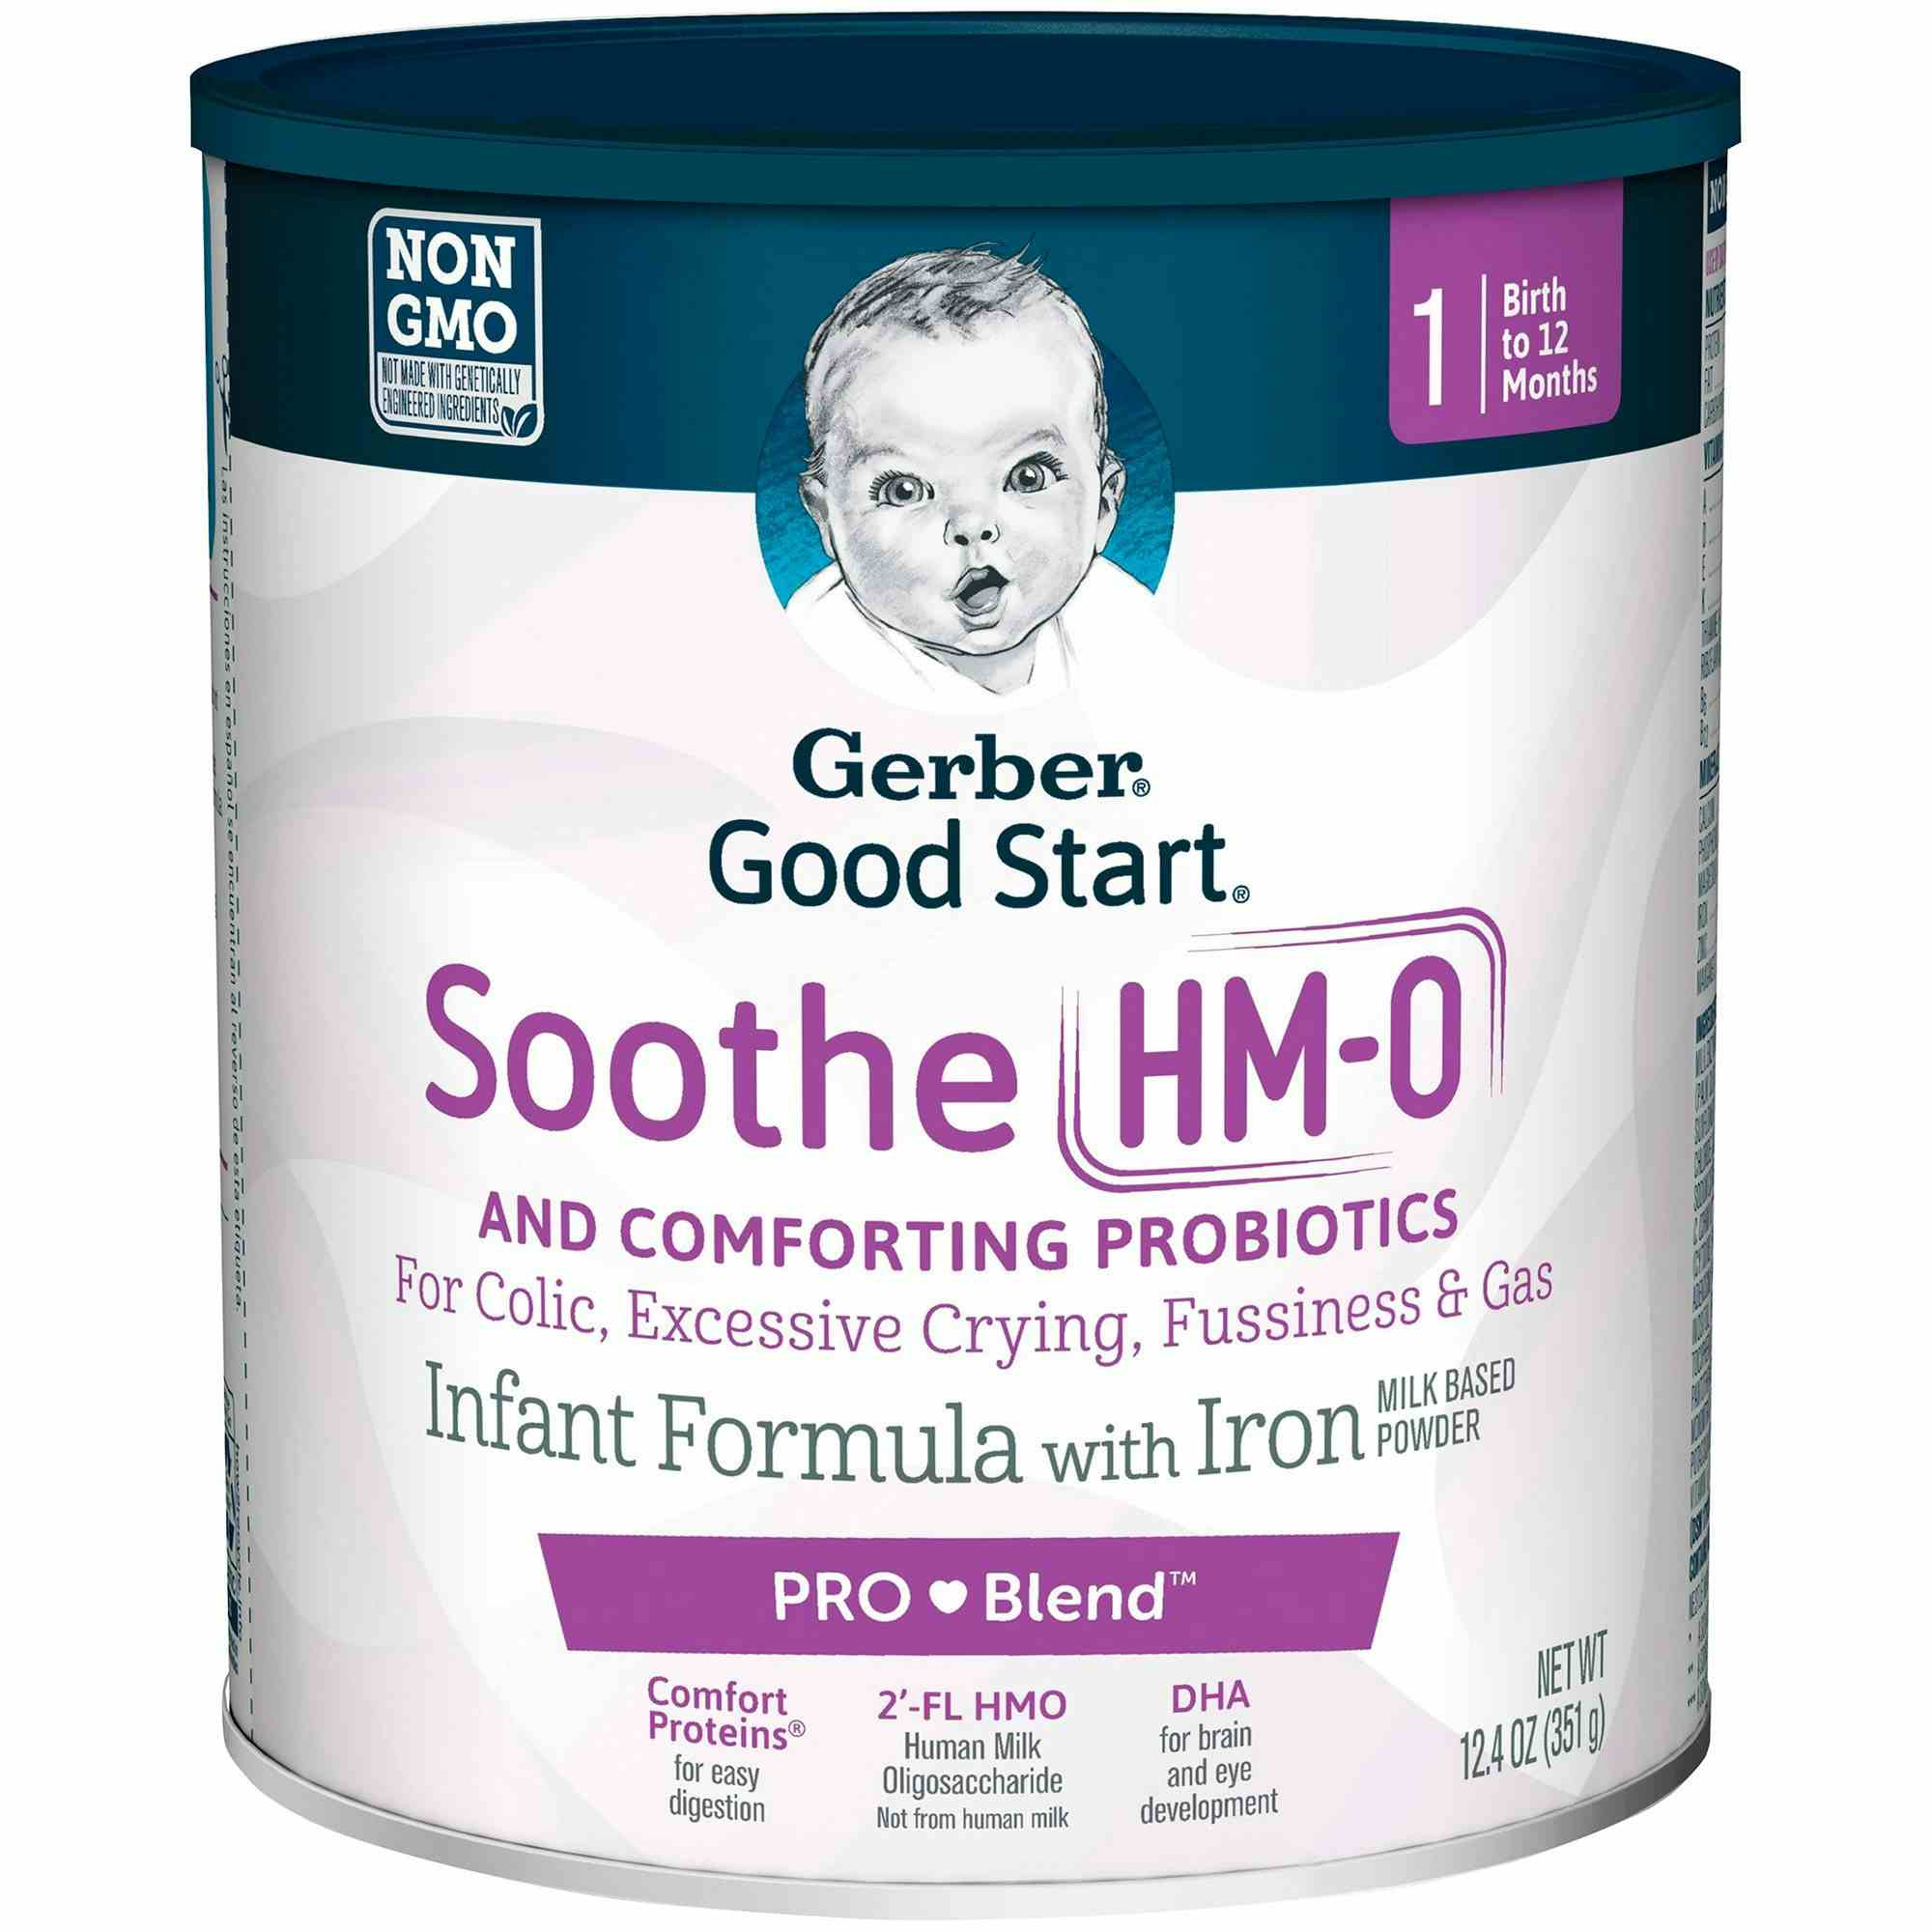 Gerber Good Start Sooth and Comforting Probiotics Infant Formula with Iron, 12.4 oz., 5000062401, 1 Each